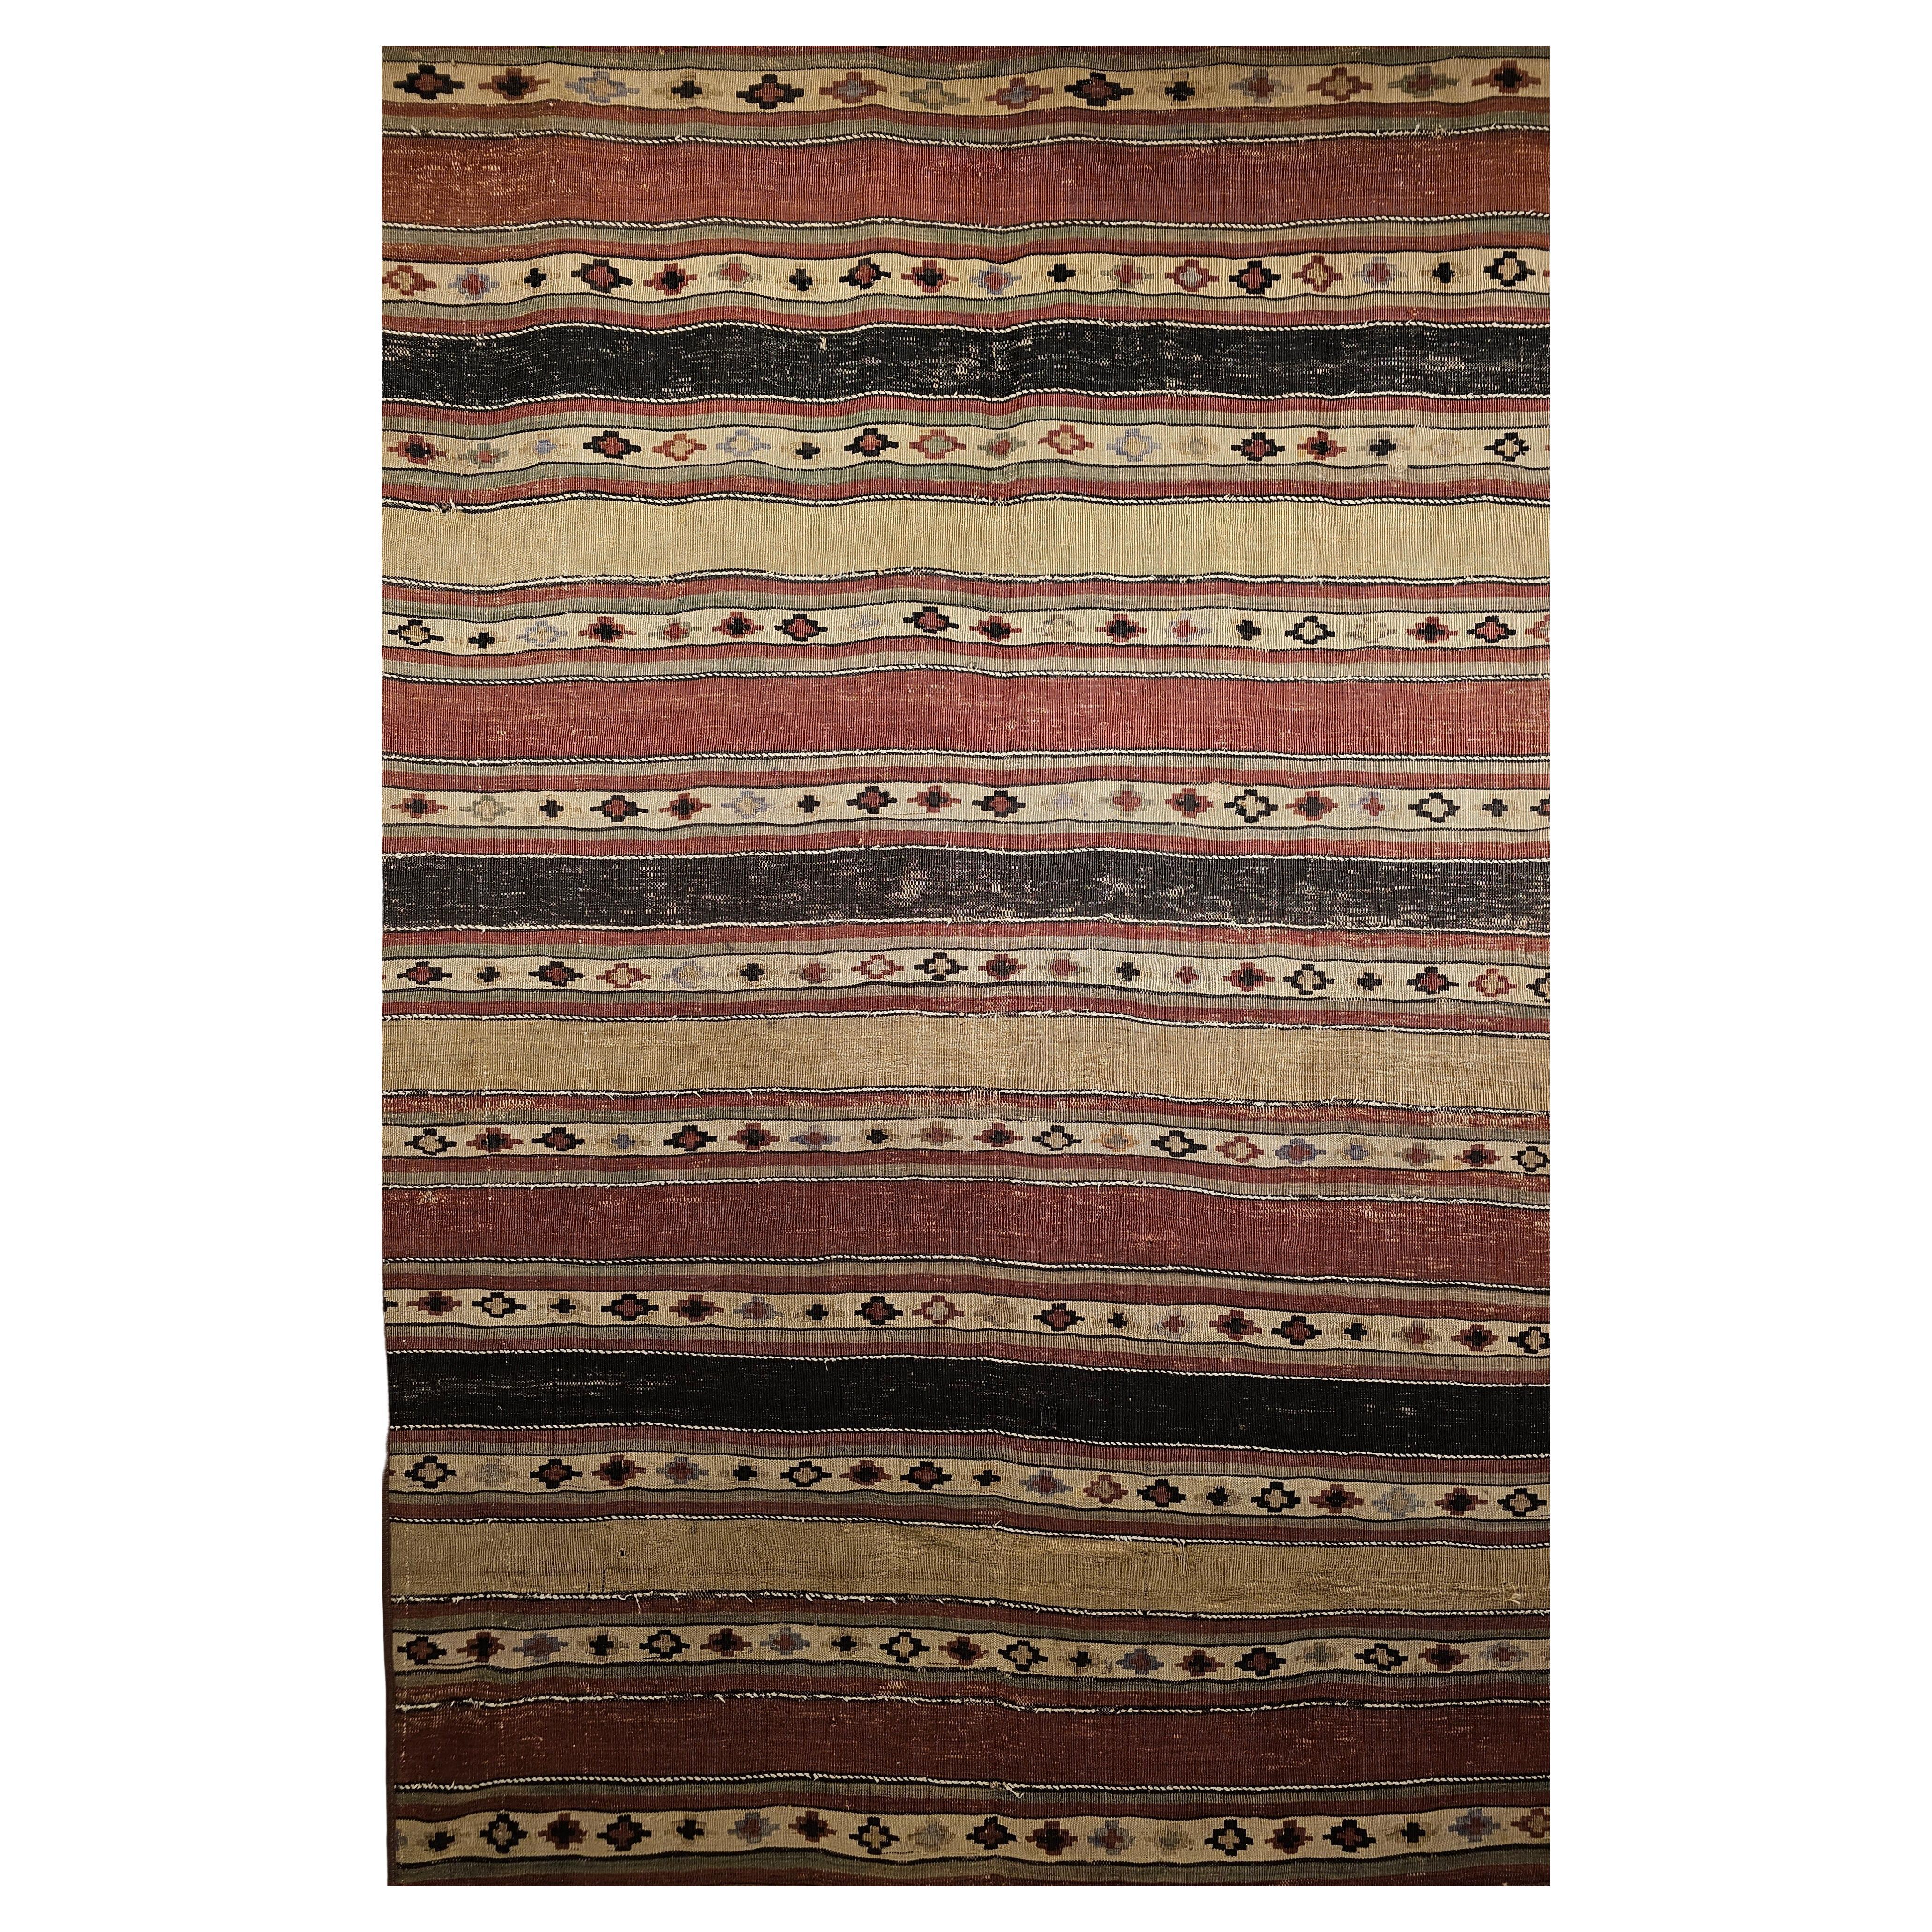 Early 1900s Persian Shahsavan Kilim with Southwestern Earth Tone Colors  For Sale